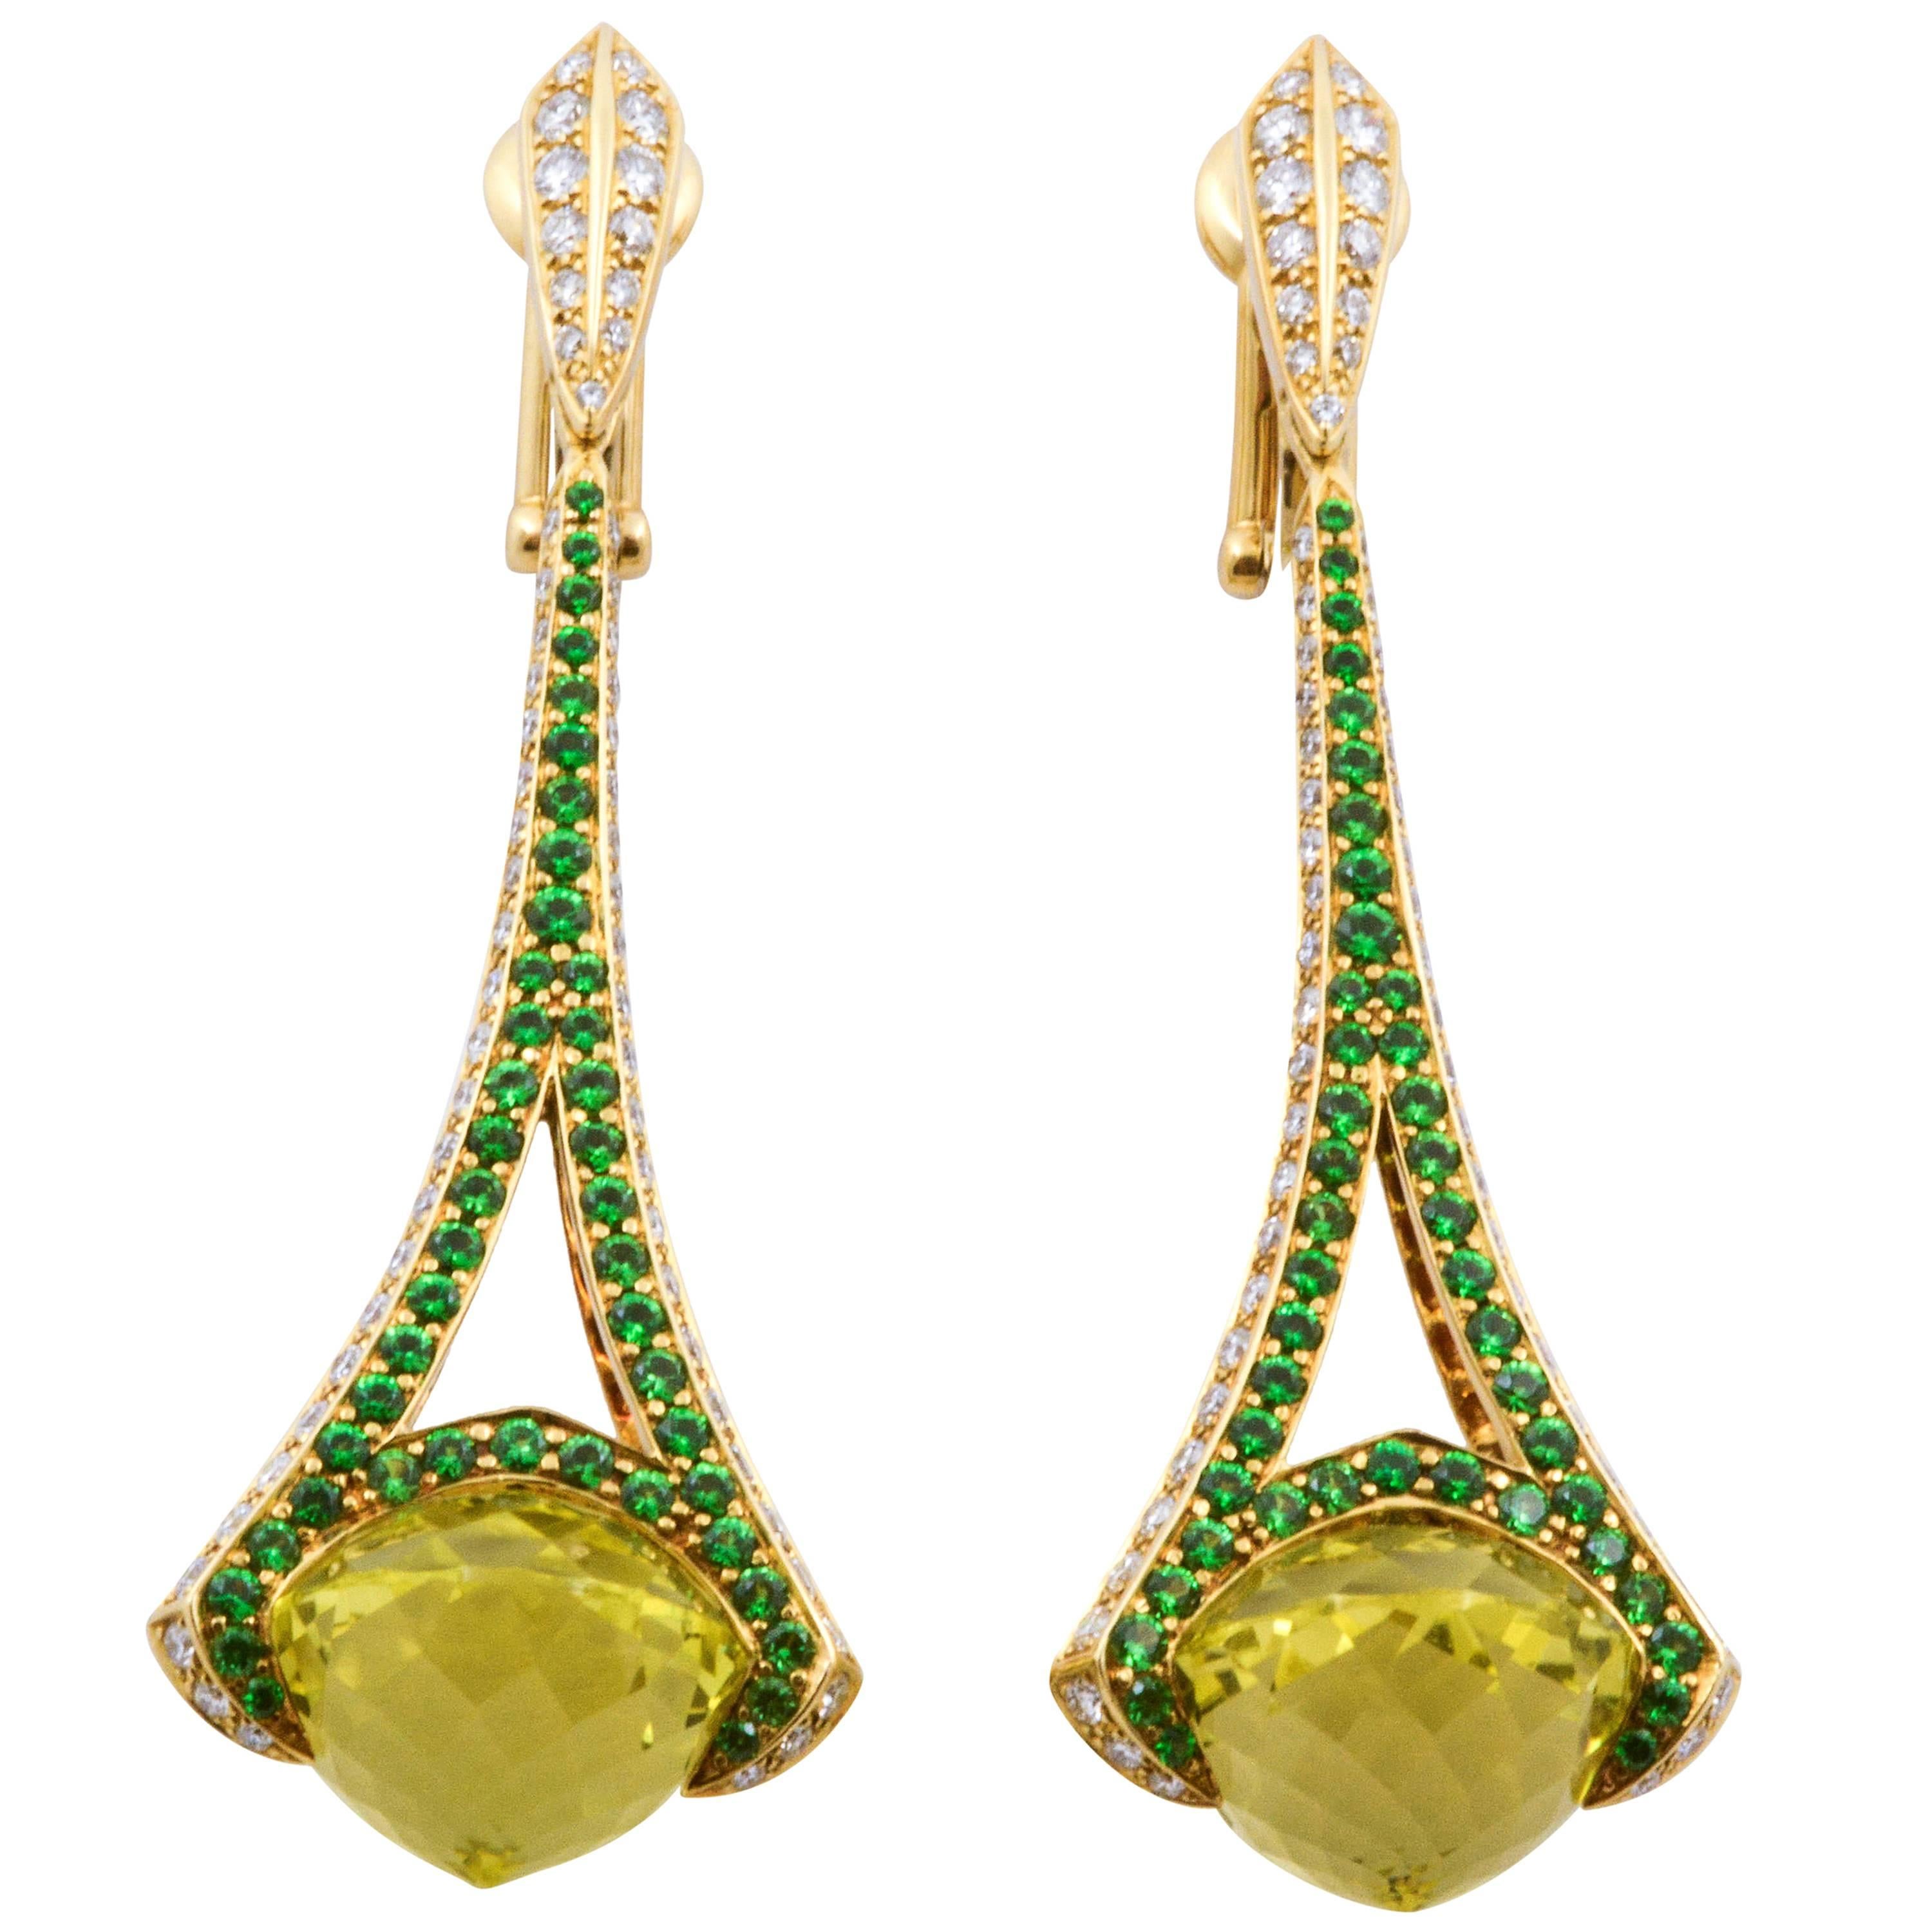 She’ll adore these enchanting gemstone and diamond drop earrings from Rodney Rayner. Created in 18K yellow gold with stunning 28.24ctw lime quartz, framed with 1.75ctw Tsavorite garnets, and 1.58ctw diamonds (G-H color and VS clarity). These